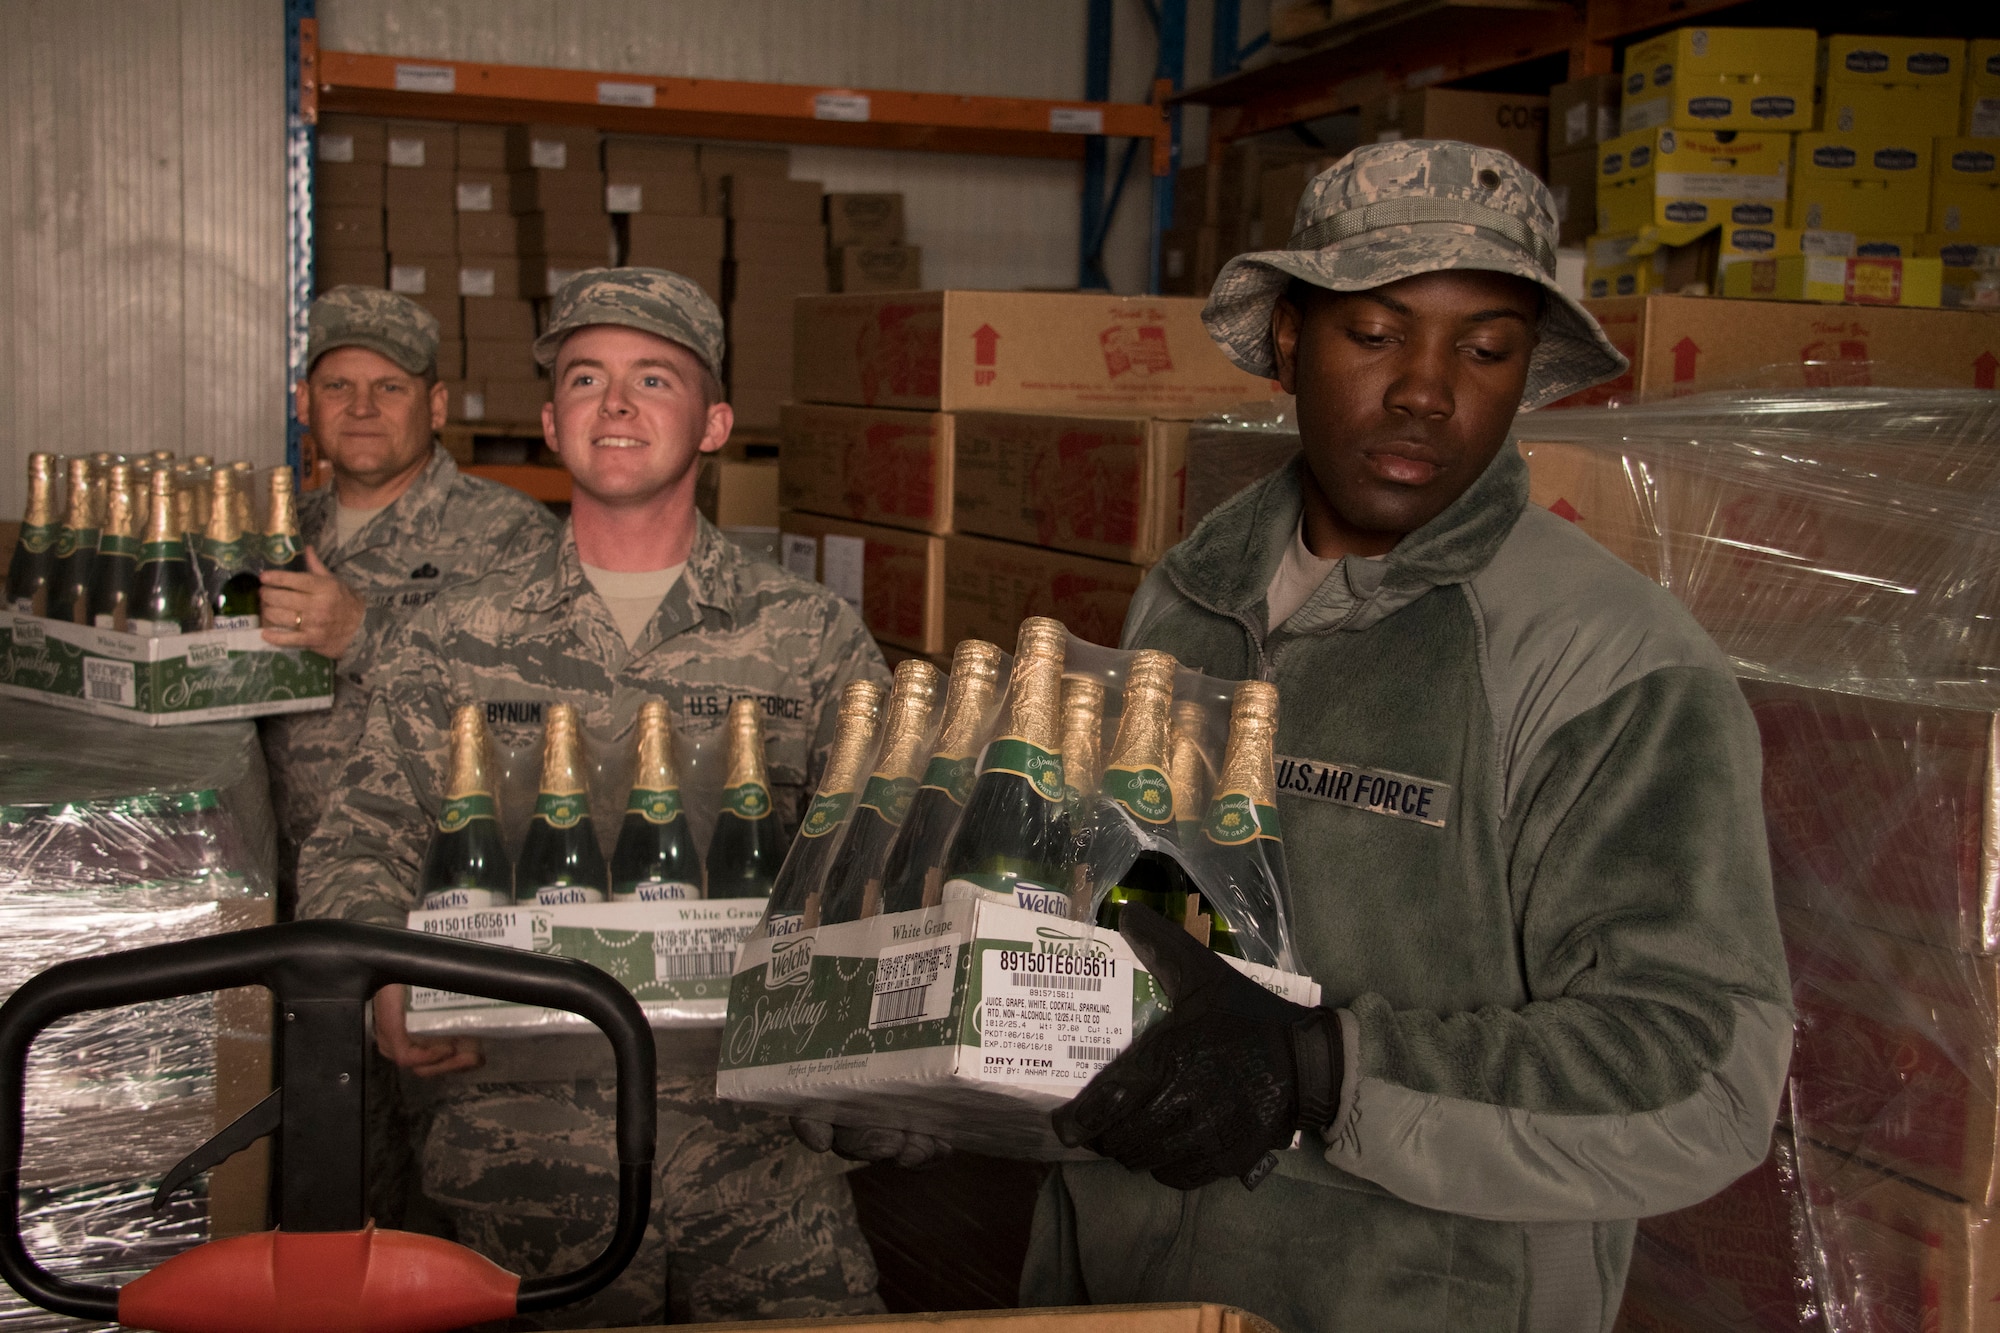 Airmen from the 386th Expeditionary Force Support Squadron carry sparkling grape juice through a storeroom Dec. 22, 2016 at an undisclosed location in Southwest Asia. These Airmen were assembling tri-walls of holiday meal items for forward-deployed service members (U.S. Air Force photo/Staff Sgt. Andrew Park)